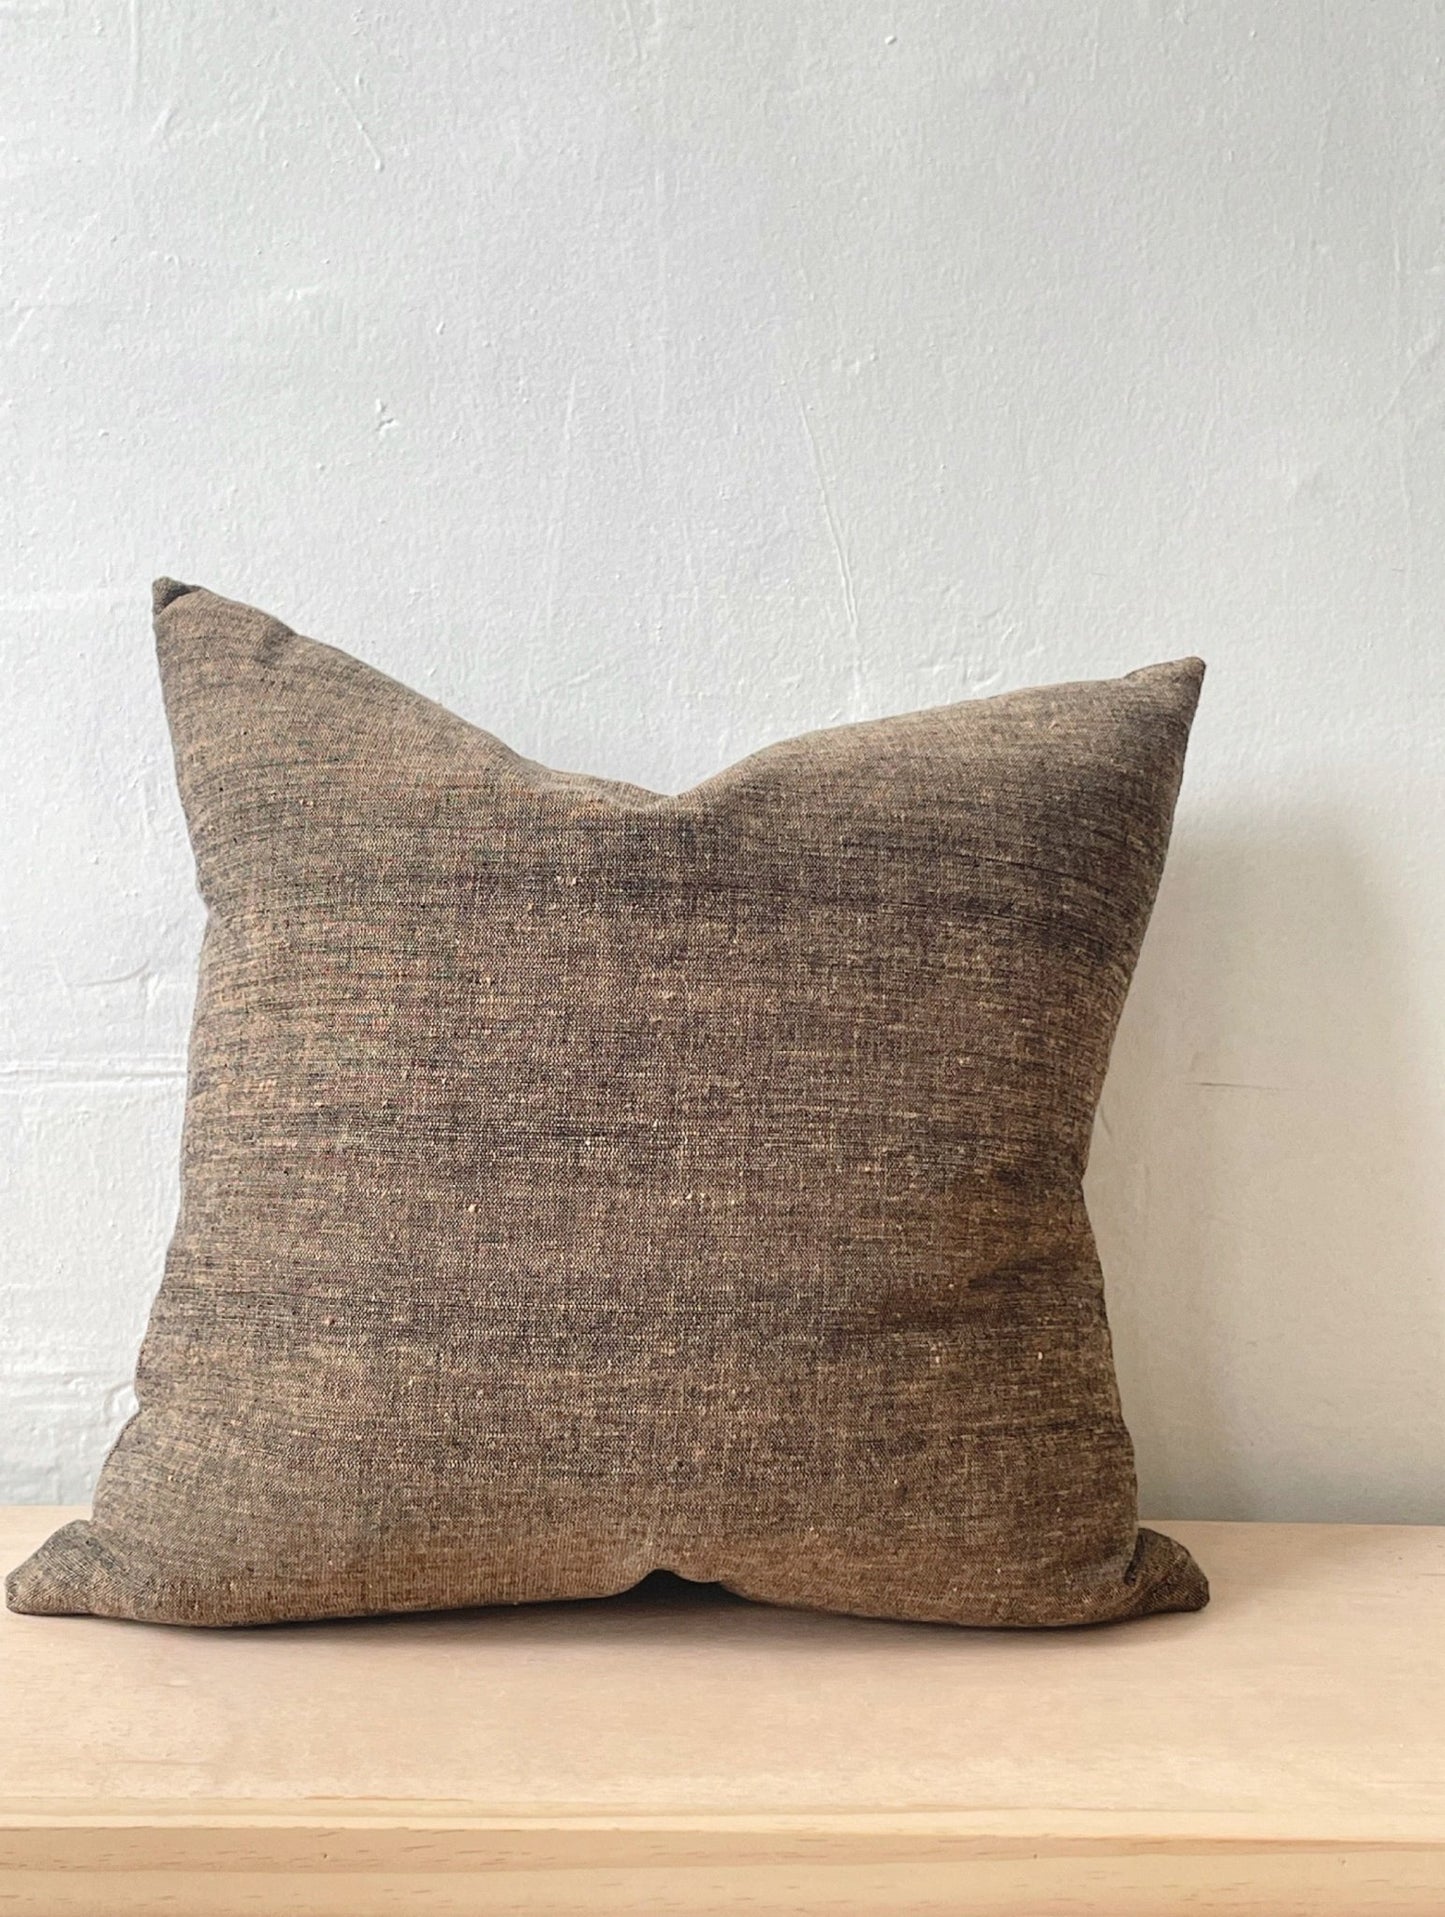 Pillow bundle - Charcoal & Marigold - Behind the Hill